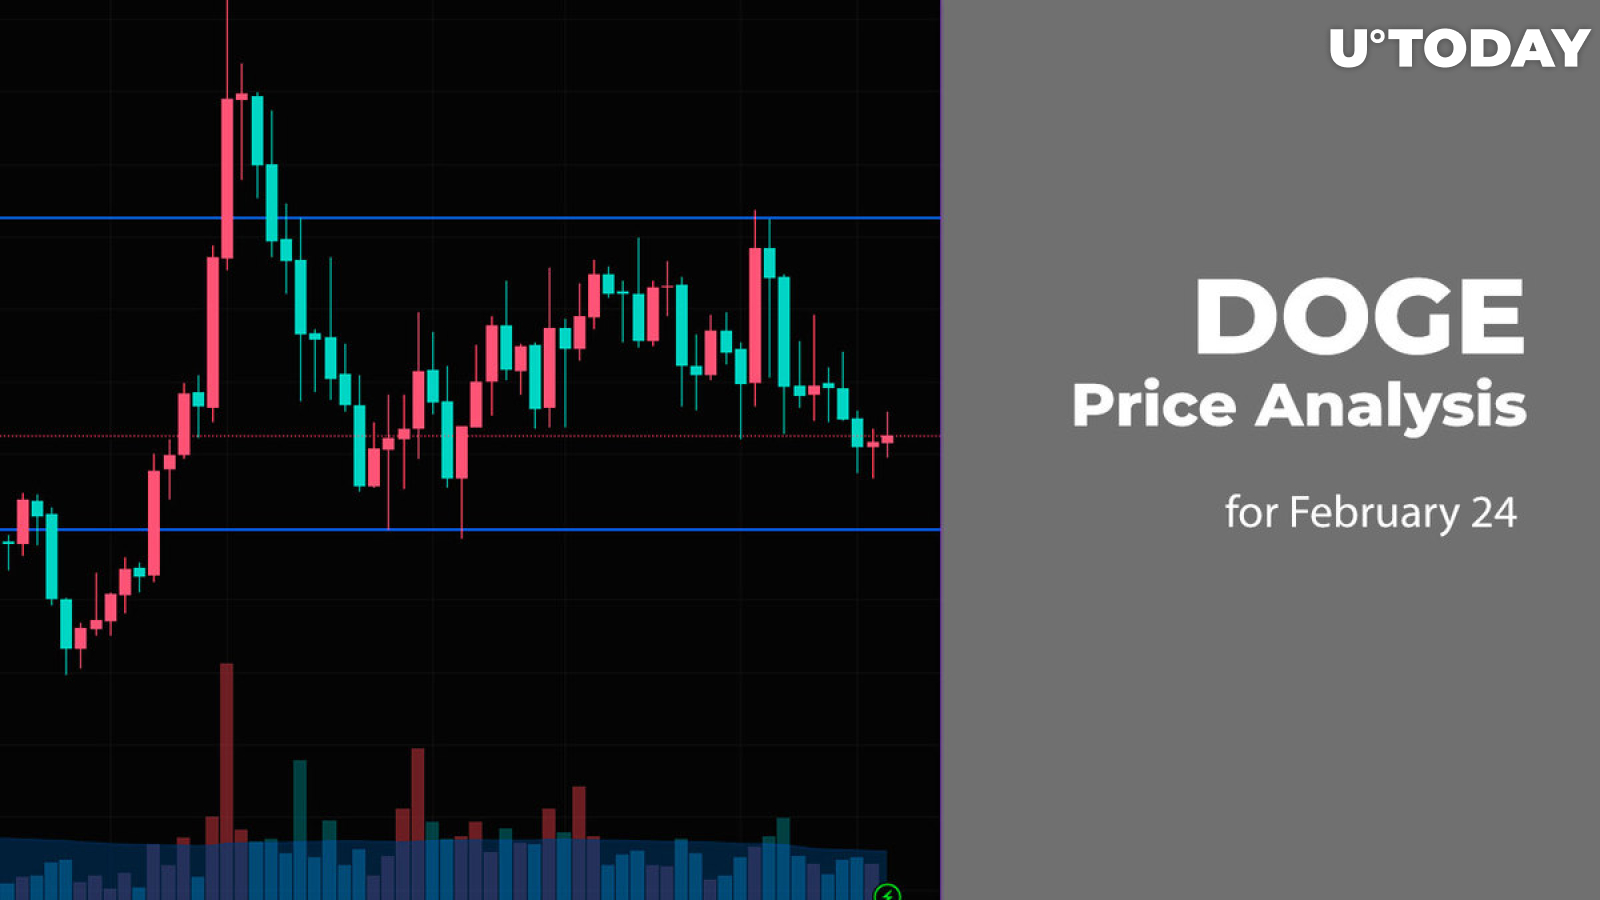 DOGE Price Analysis for February 24